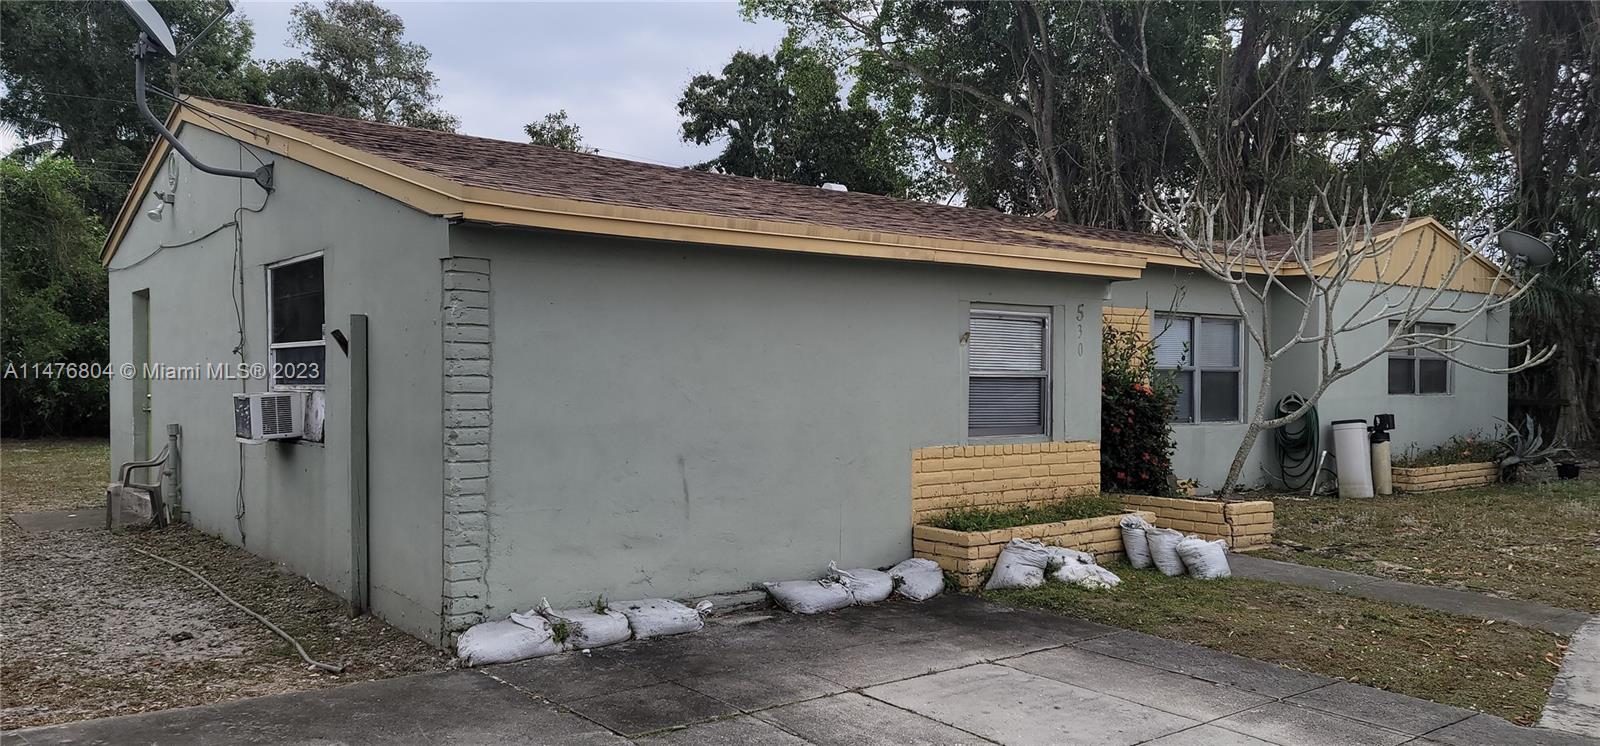 Address Not Disclosed, Fort Lauderdale, Broward County, Florida - 3 Bedrooms  
2 Bathrooms - 